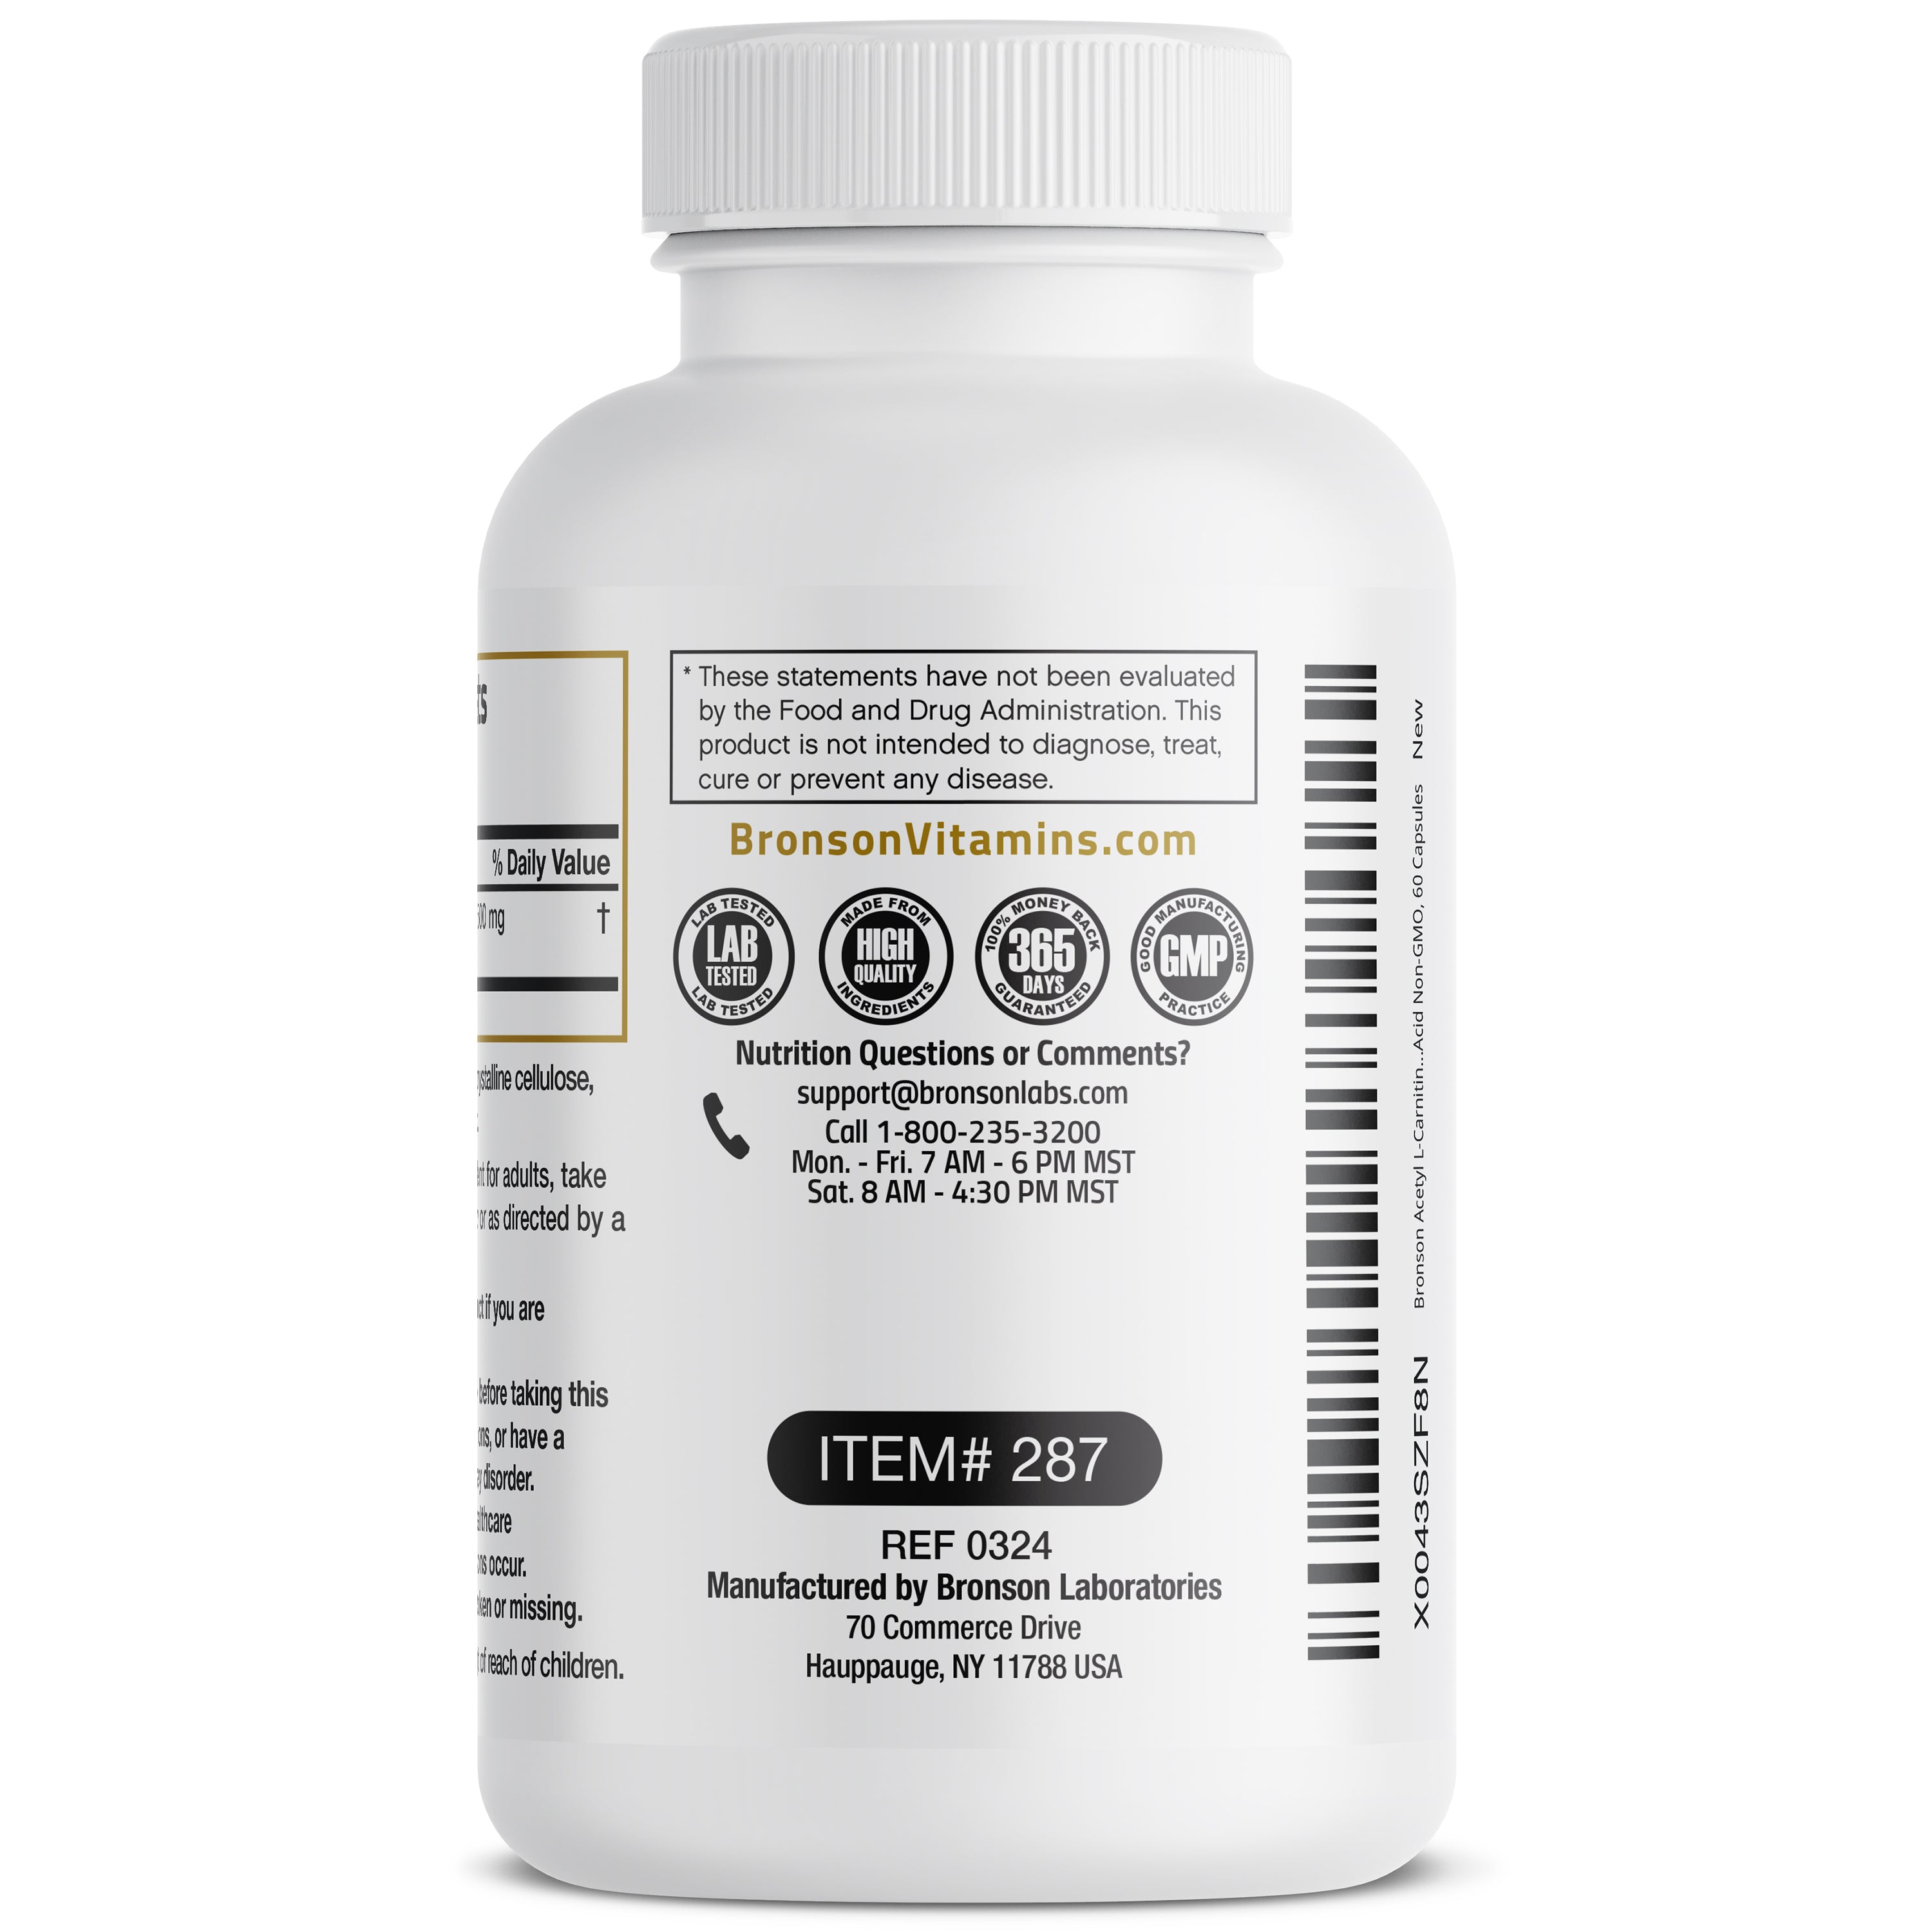 Acetyl L-Carnitine - 500 MG view 3 of 4